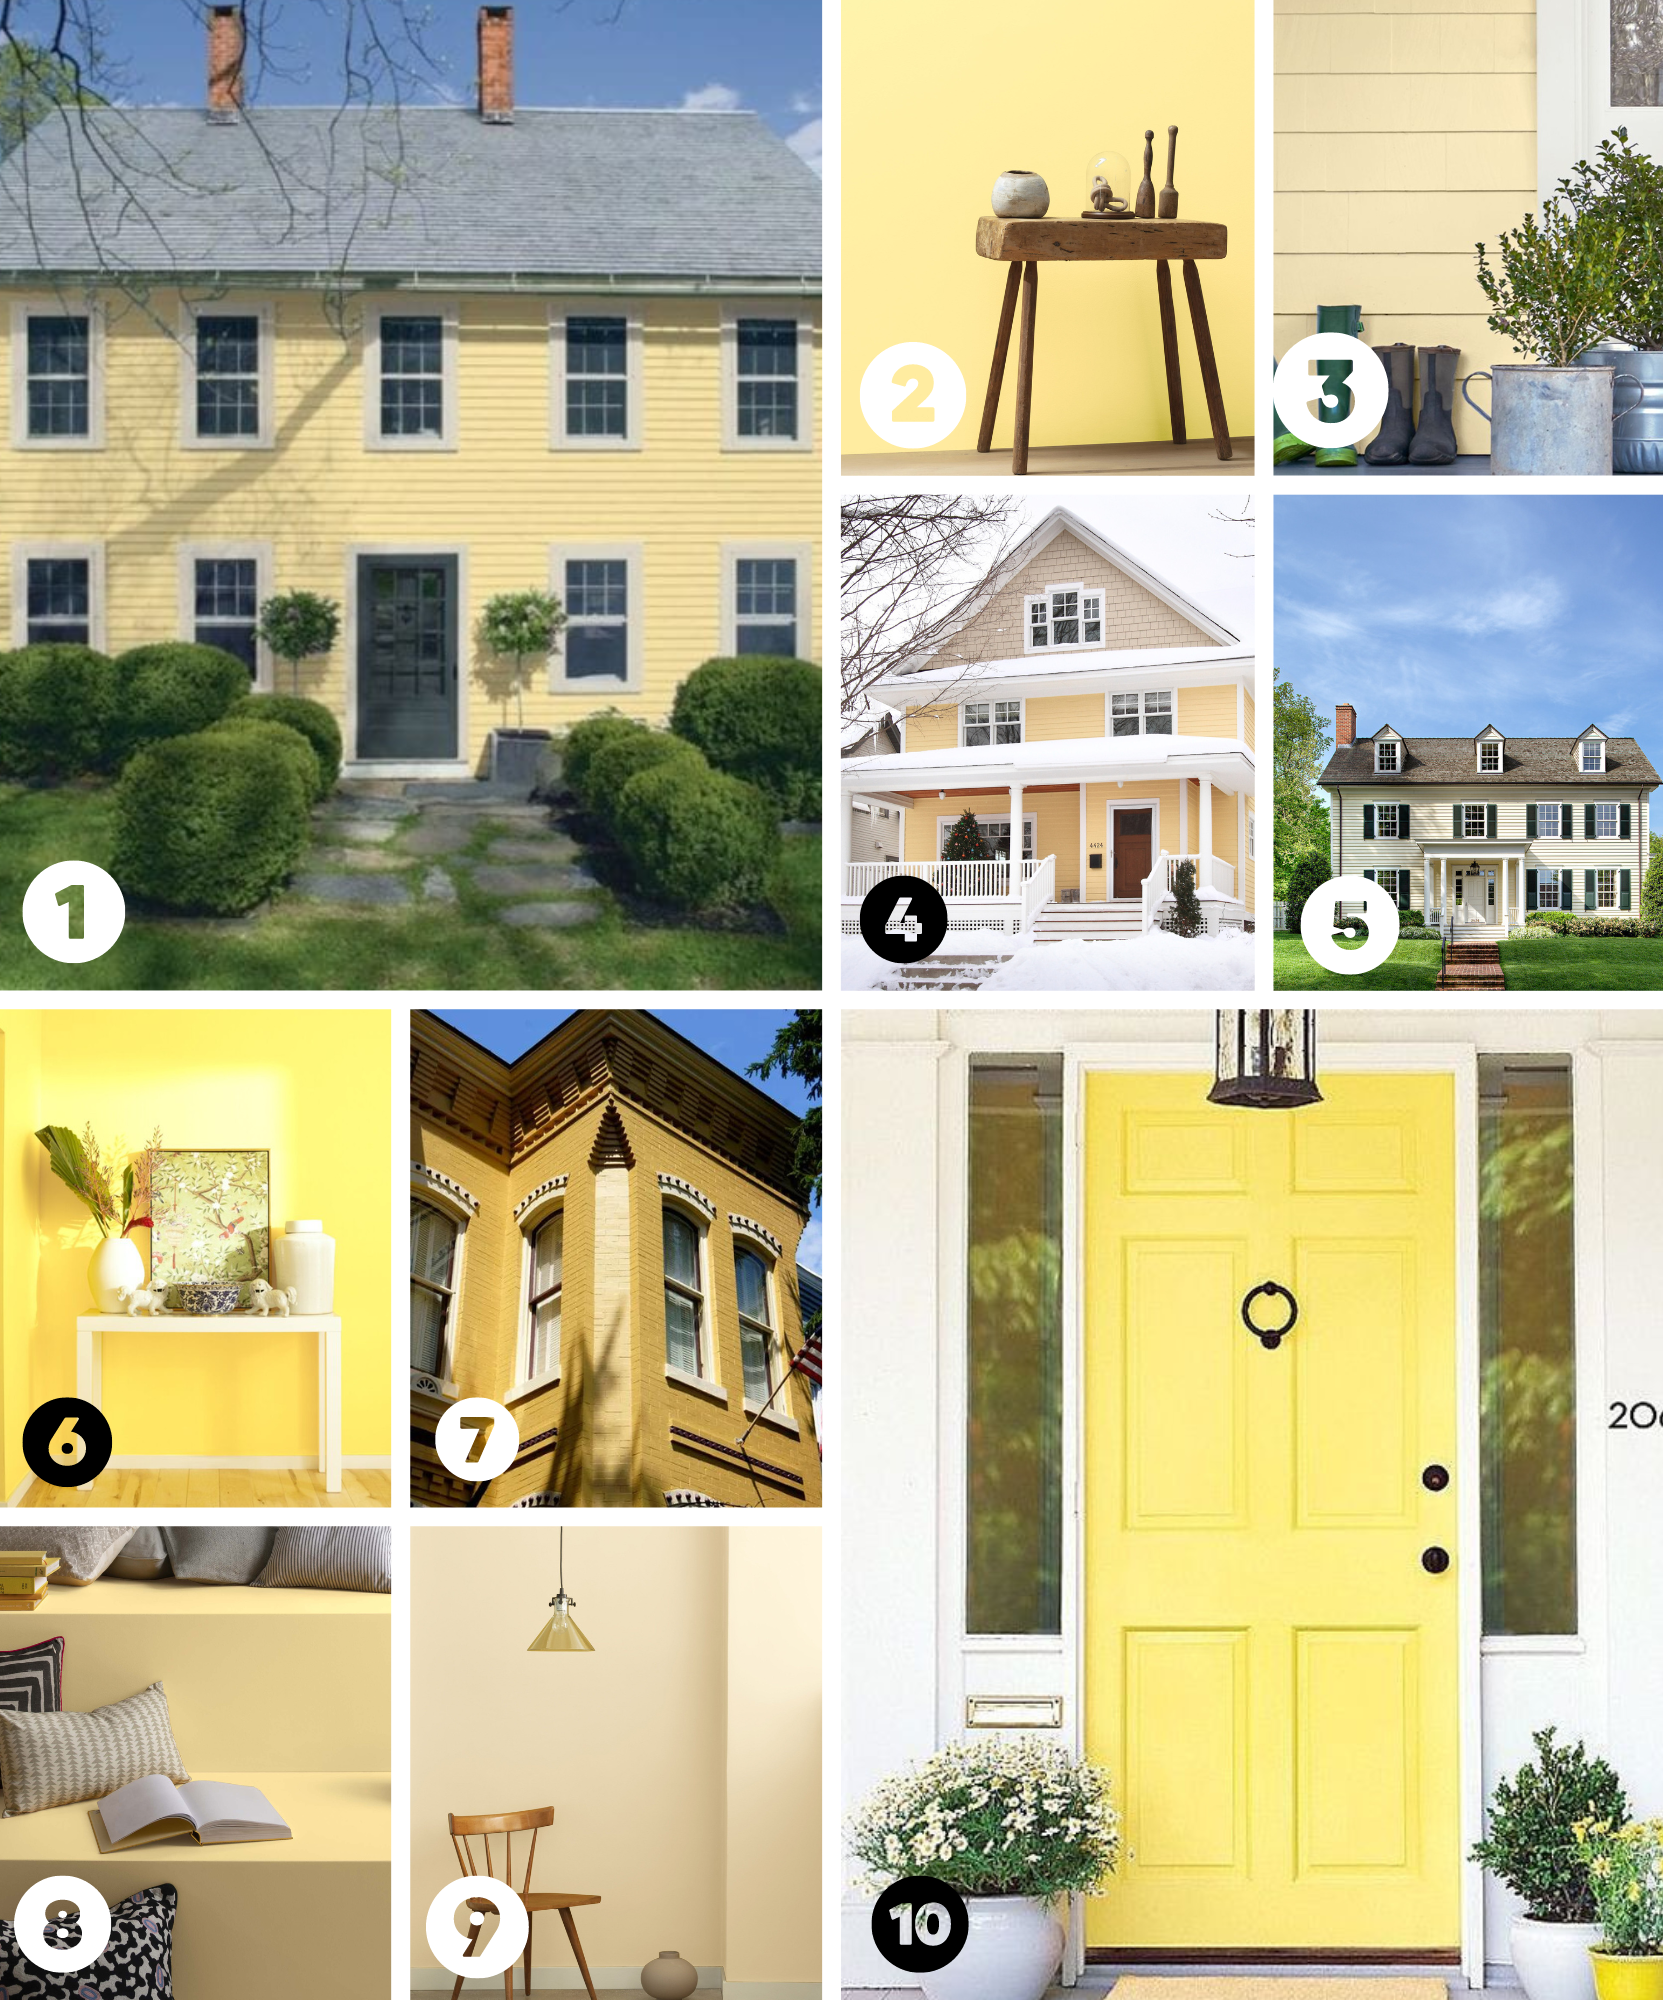 Top Yellow Paint Colors For Home Exterior shows pictures of the top 10 yellow paint colors on home exteriors and inside spaces.